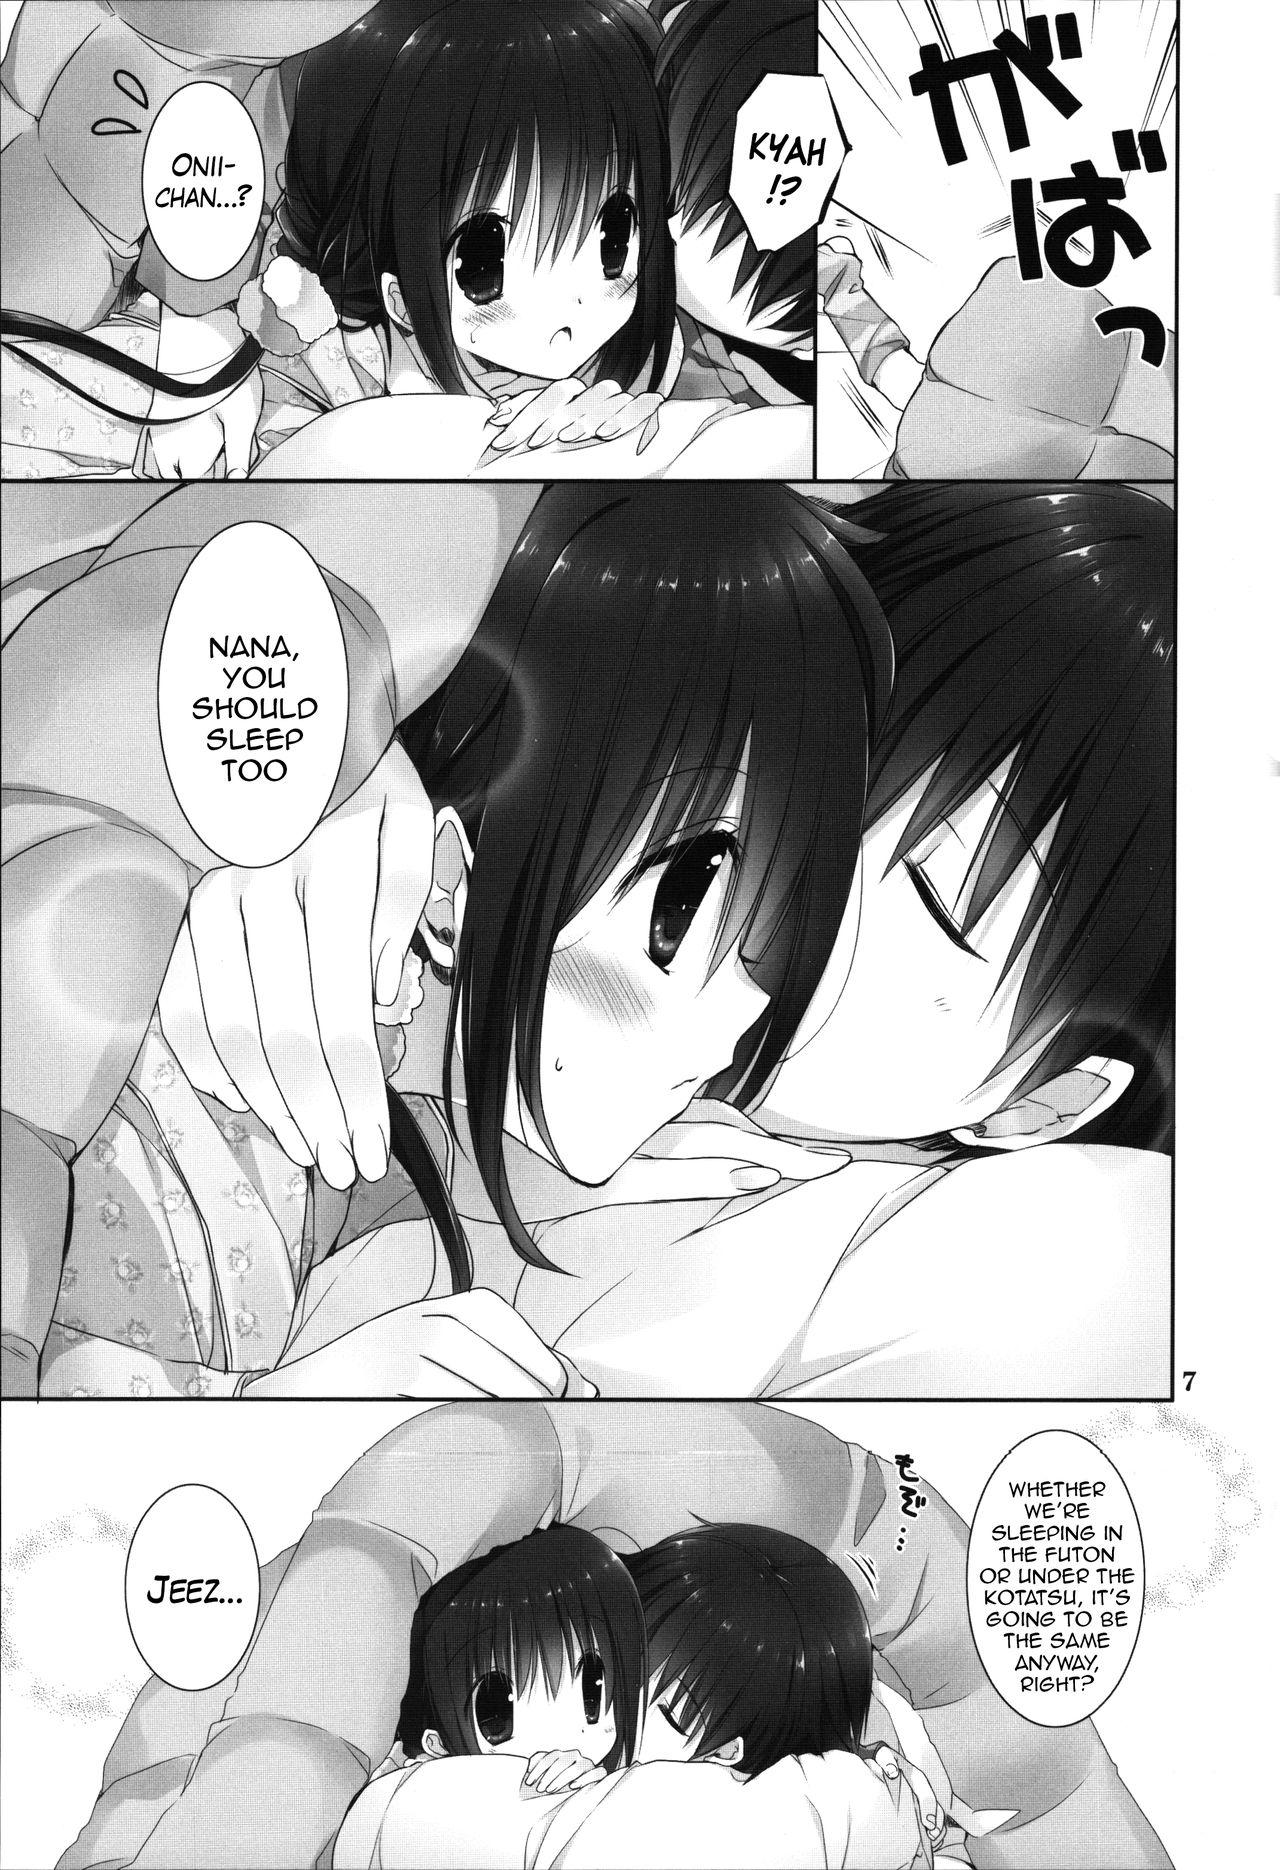 Mask Imouto no Otetsudai 8 | Little Sister Helper 8 Lovers - Page 6